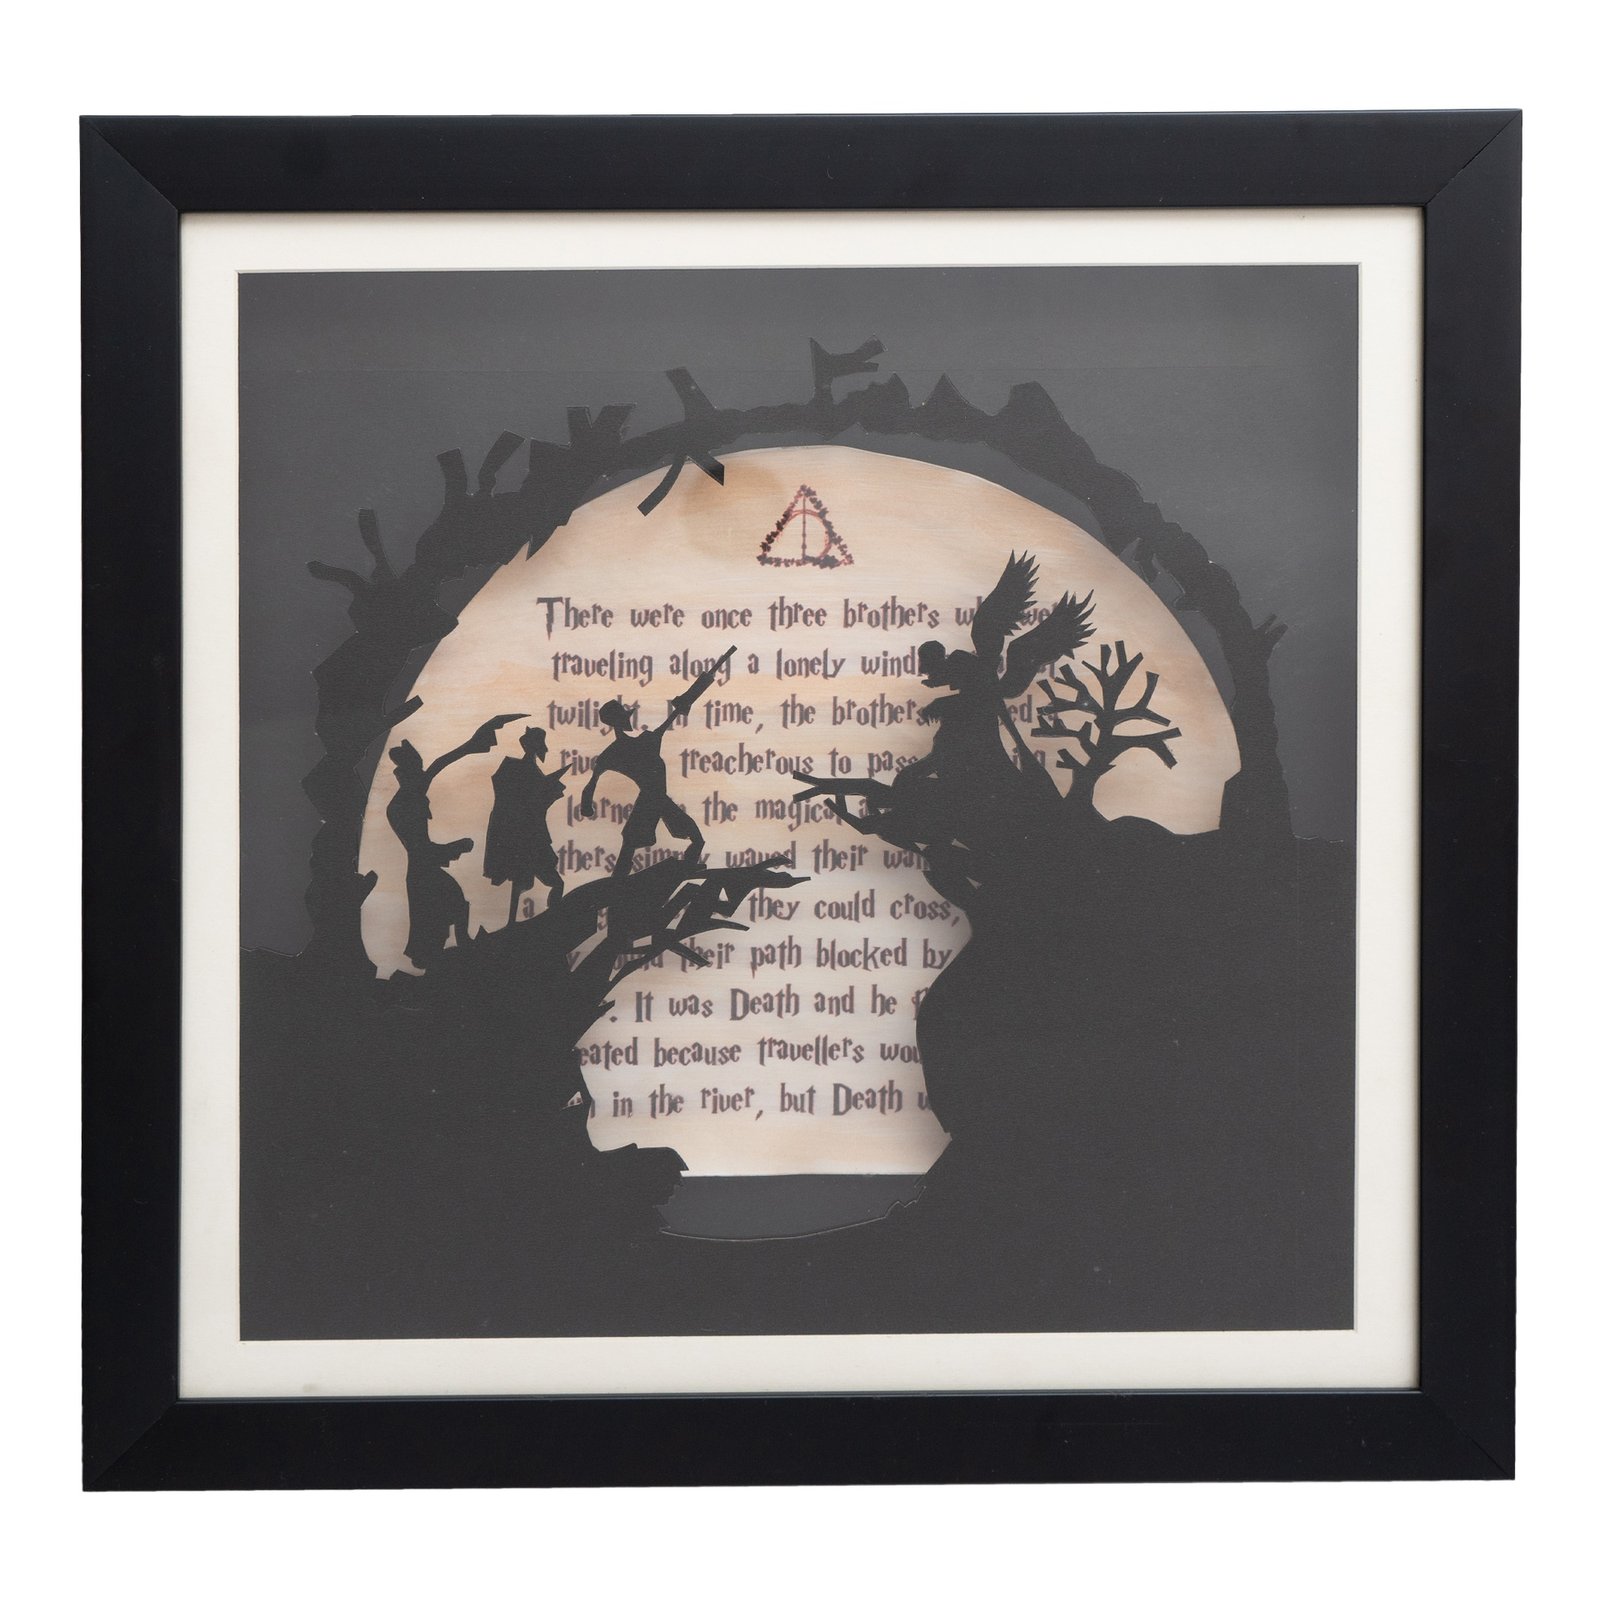 Buy Harry Potter Wall Art - The tale of three Brother - SMEWIndia